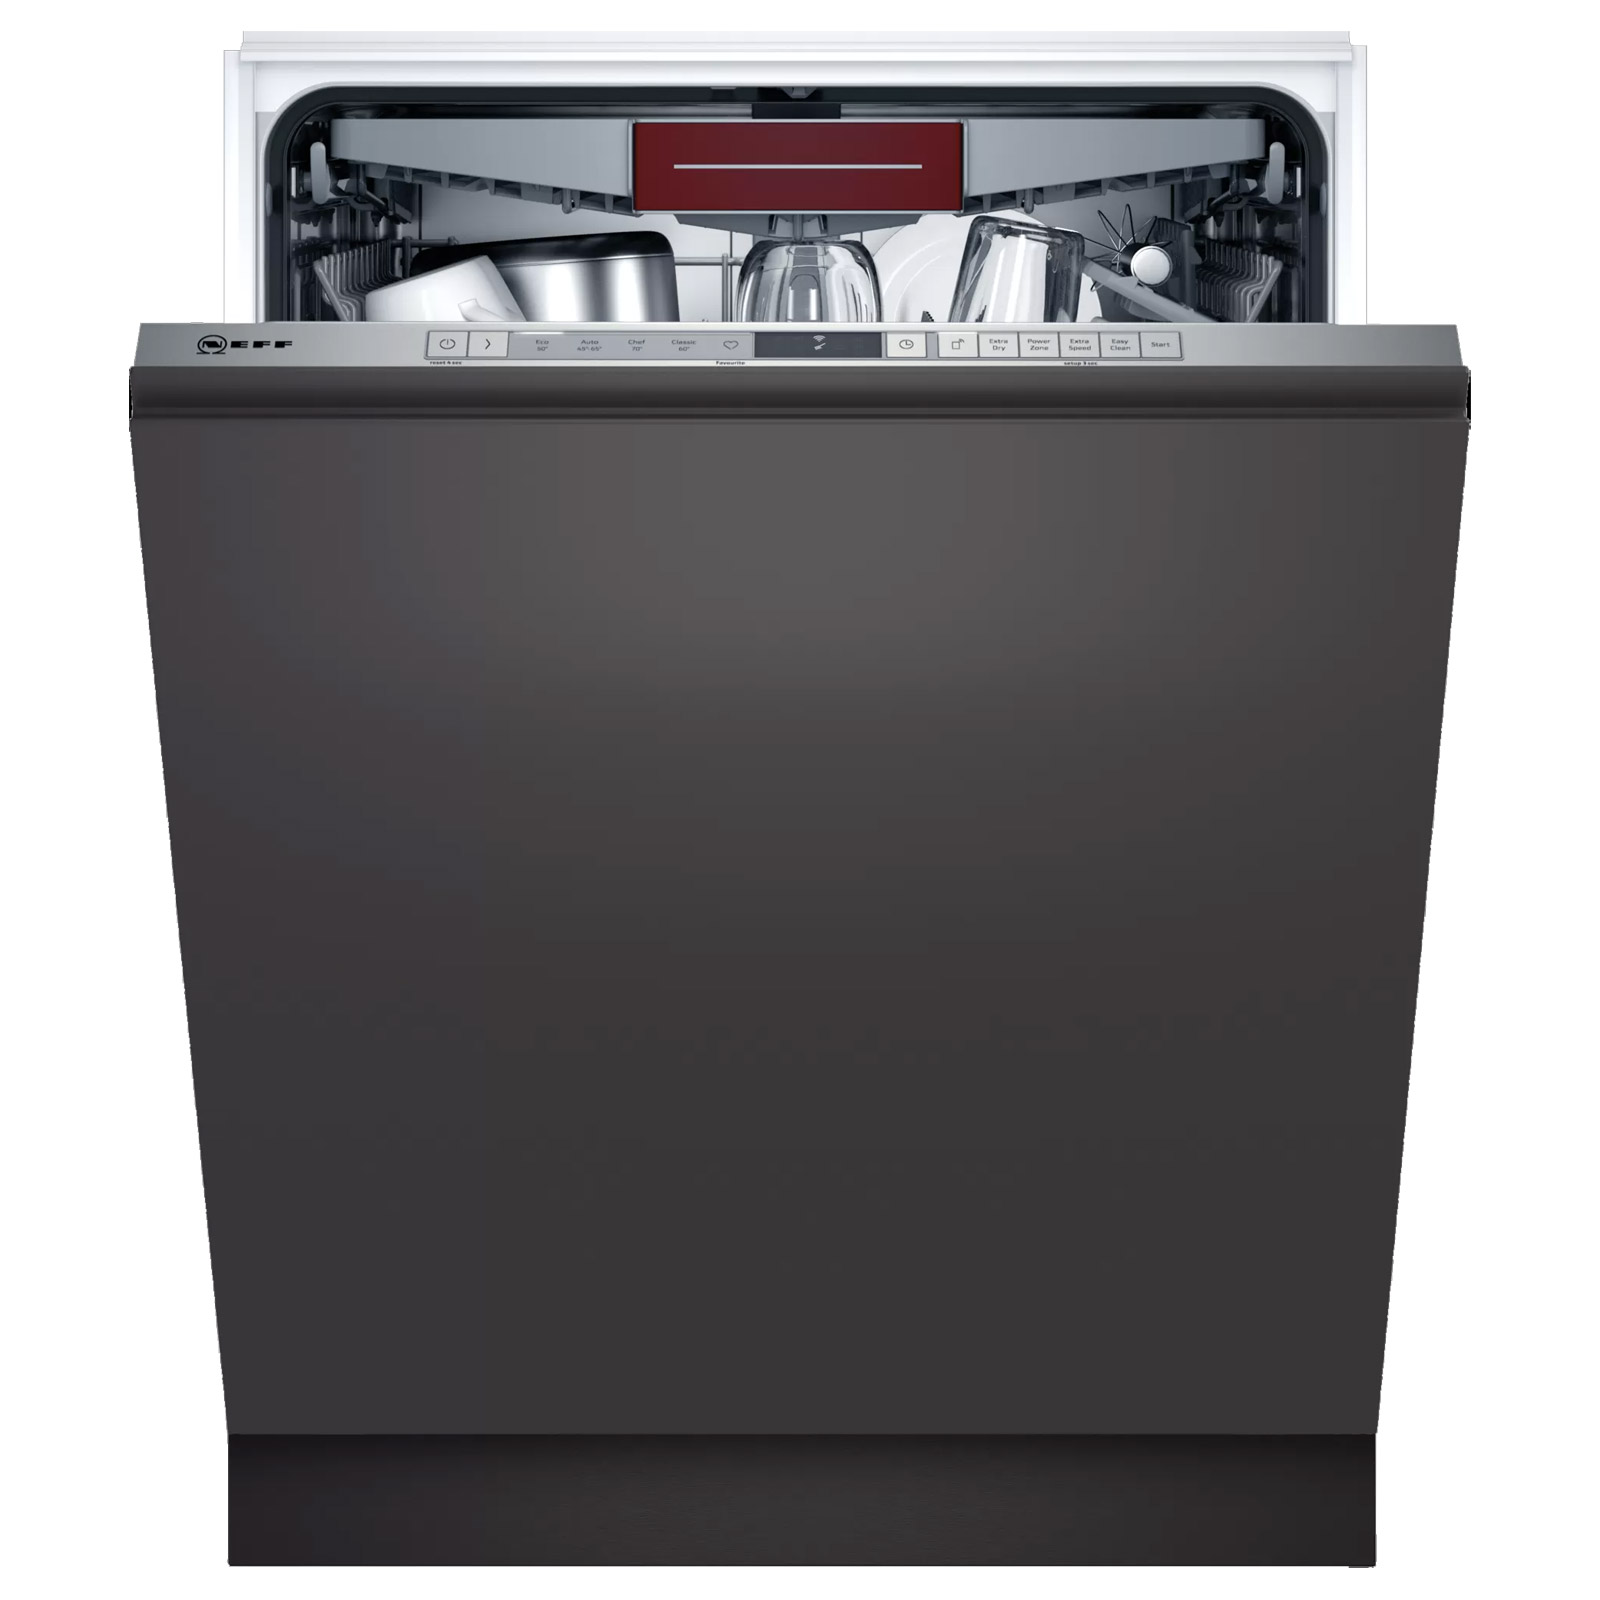 Image of Neff S153HCX02G N30 60cm Fully Integrated Dishwasher 14 Place D Rated